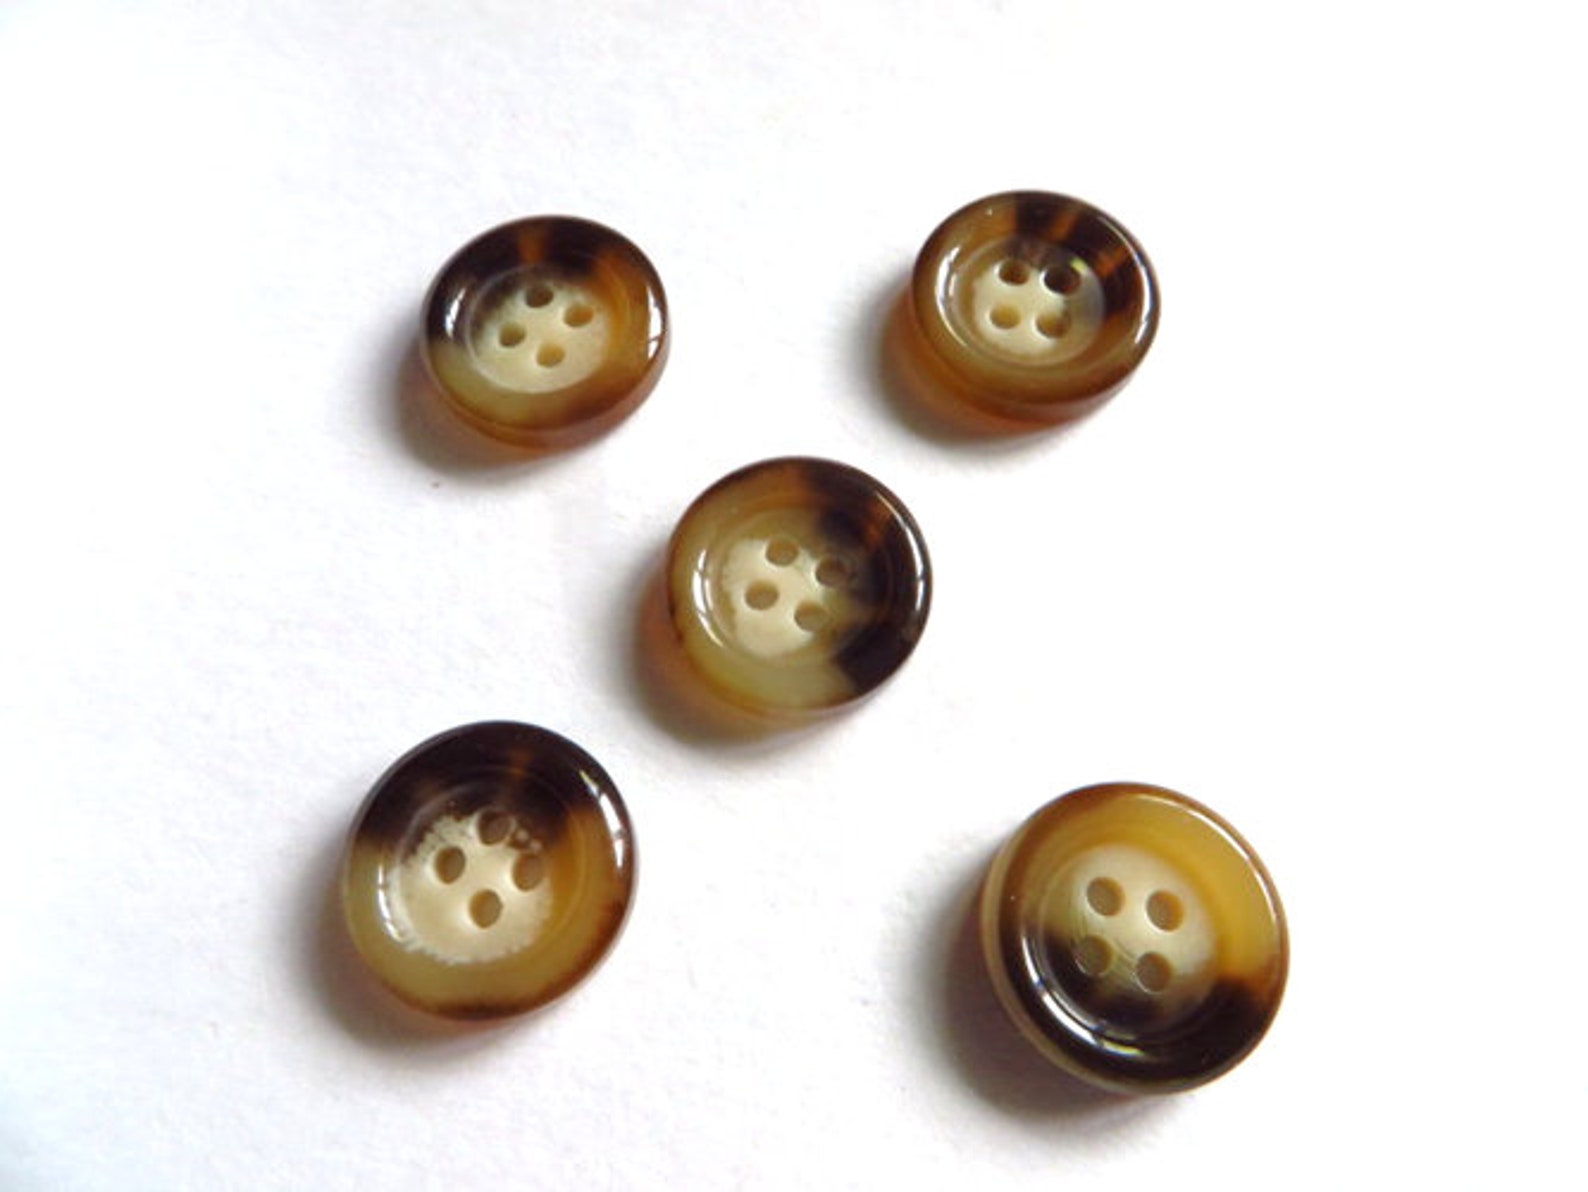 Tortoiseshell Design Buttons Small Brown Buttons Set of Fake - Etsy